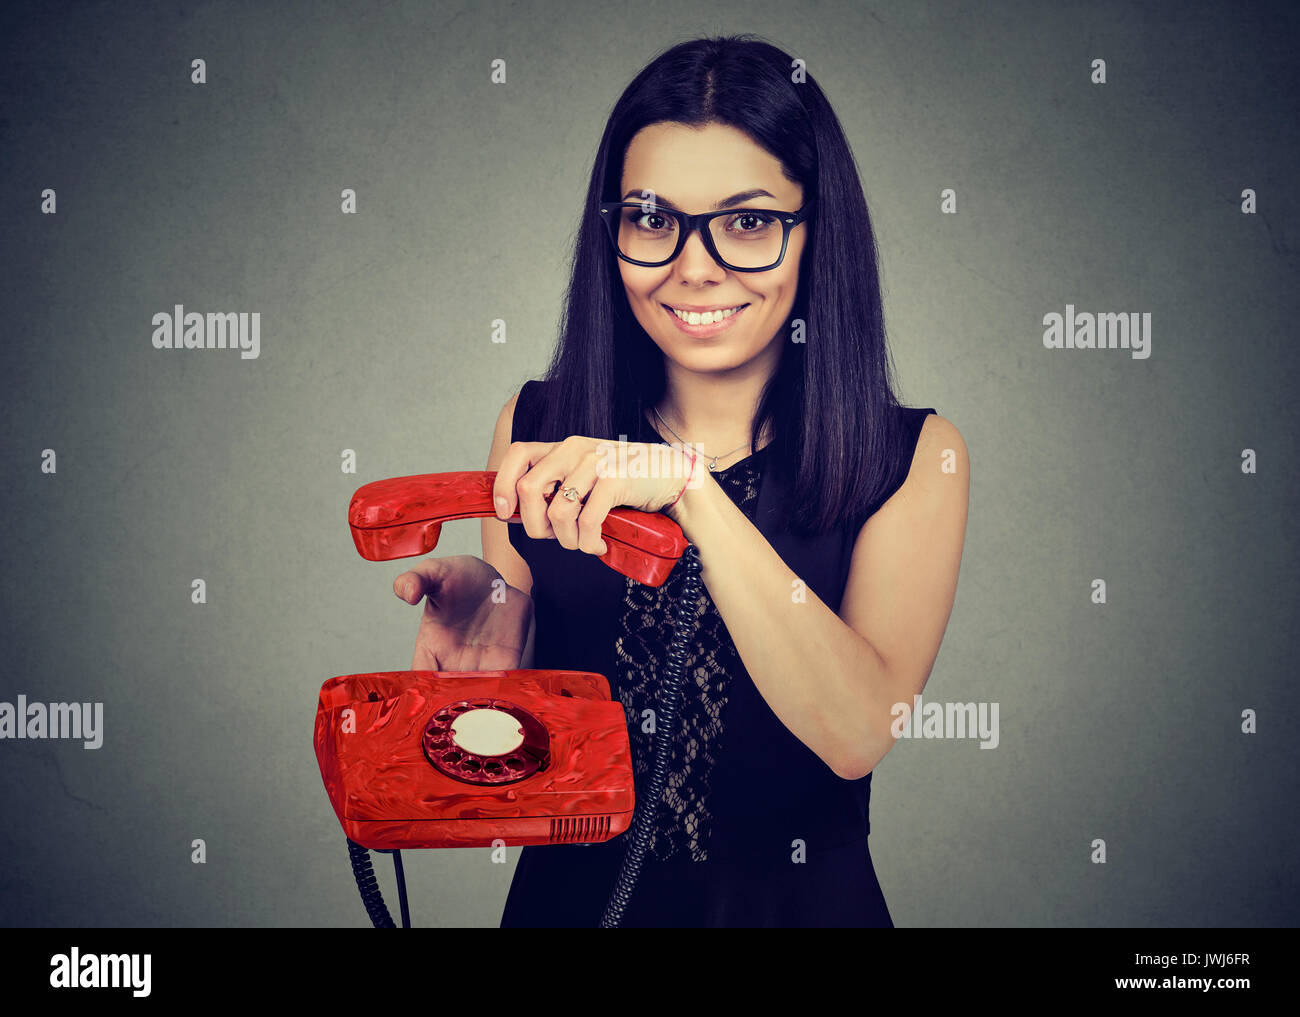 Smiling woman hanging up an old phone Stock Photo